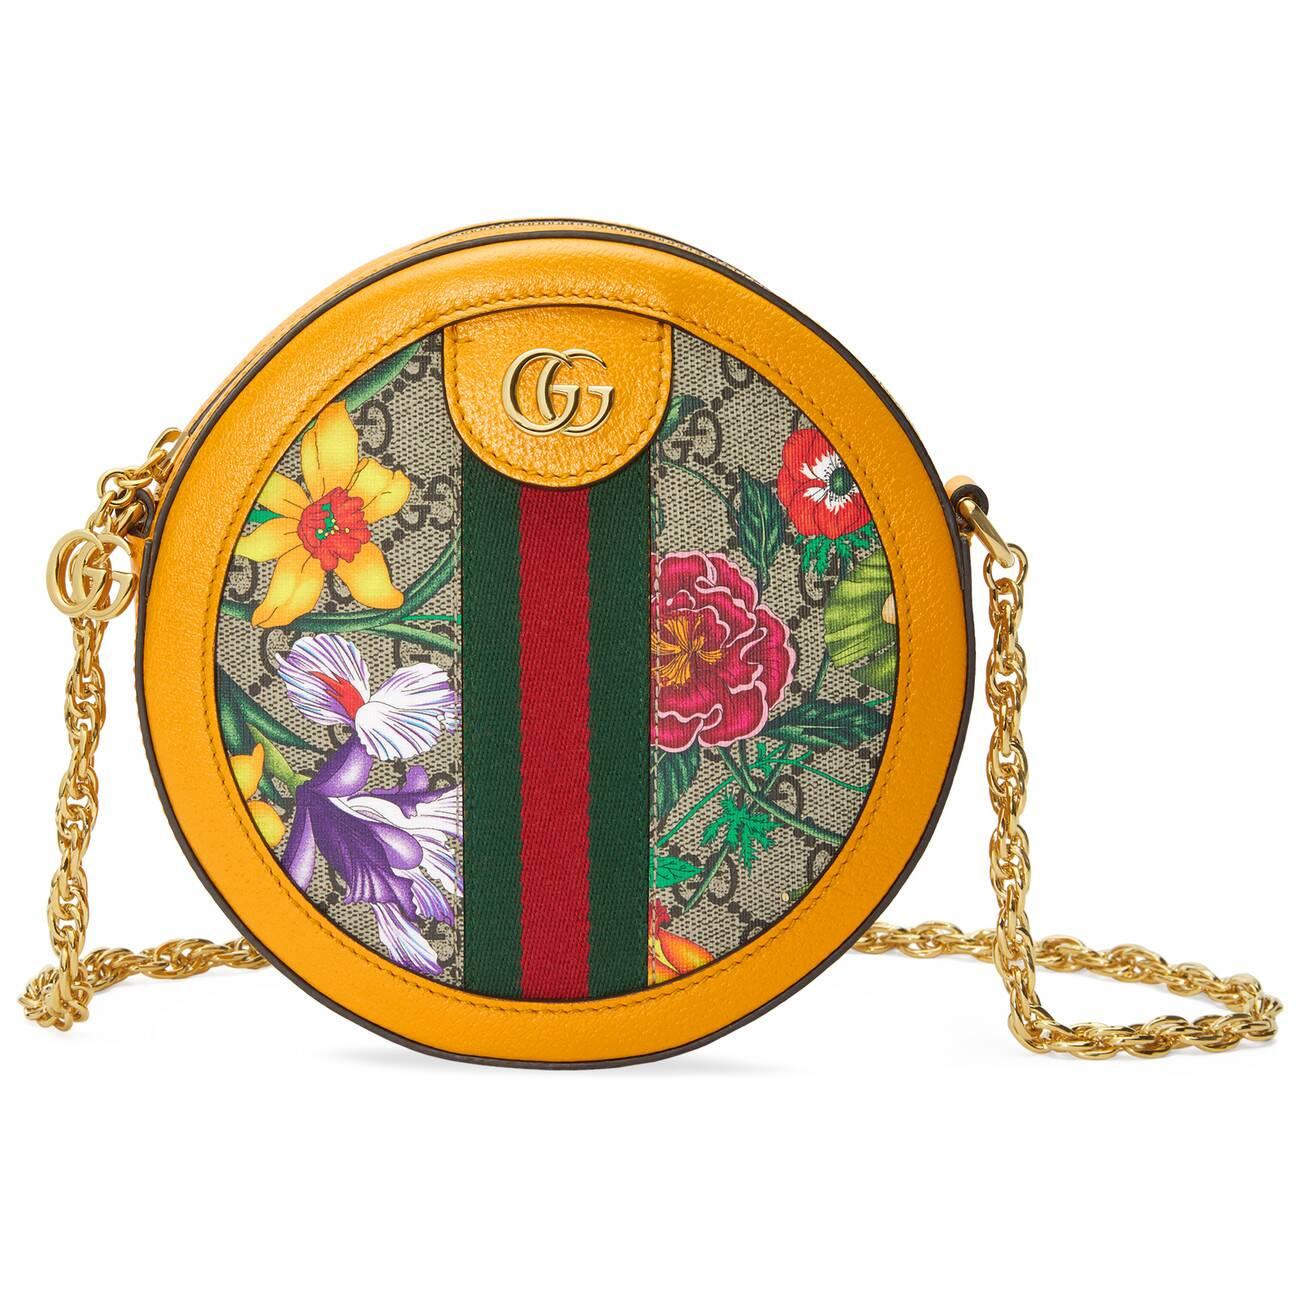 Gucci Ophidia GG Flora Mini Round Shoulder Bag in Yellow | Lyst